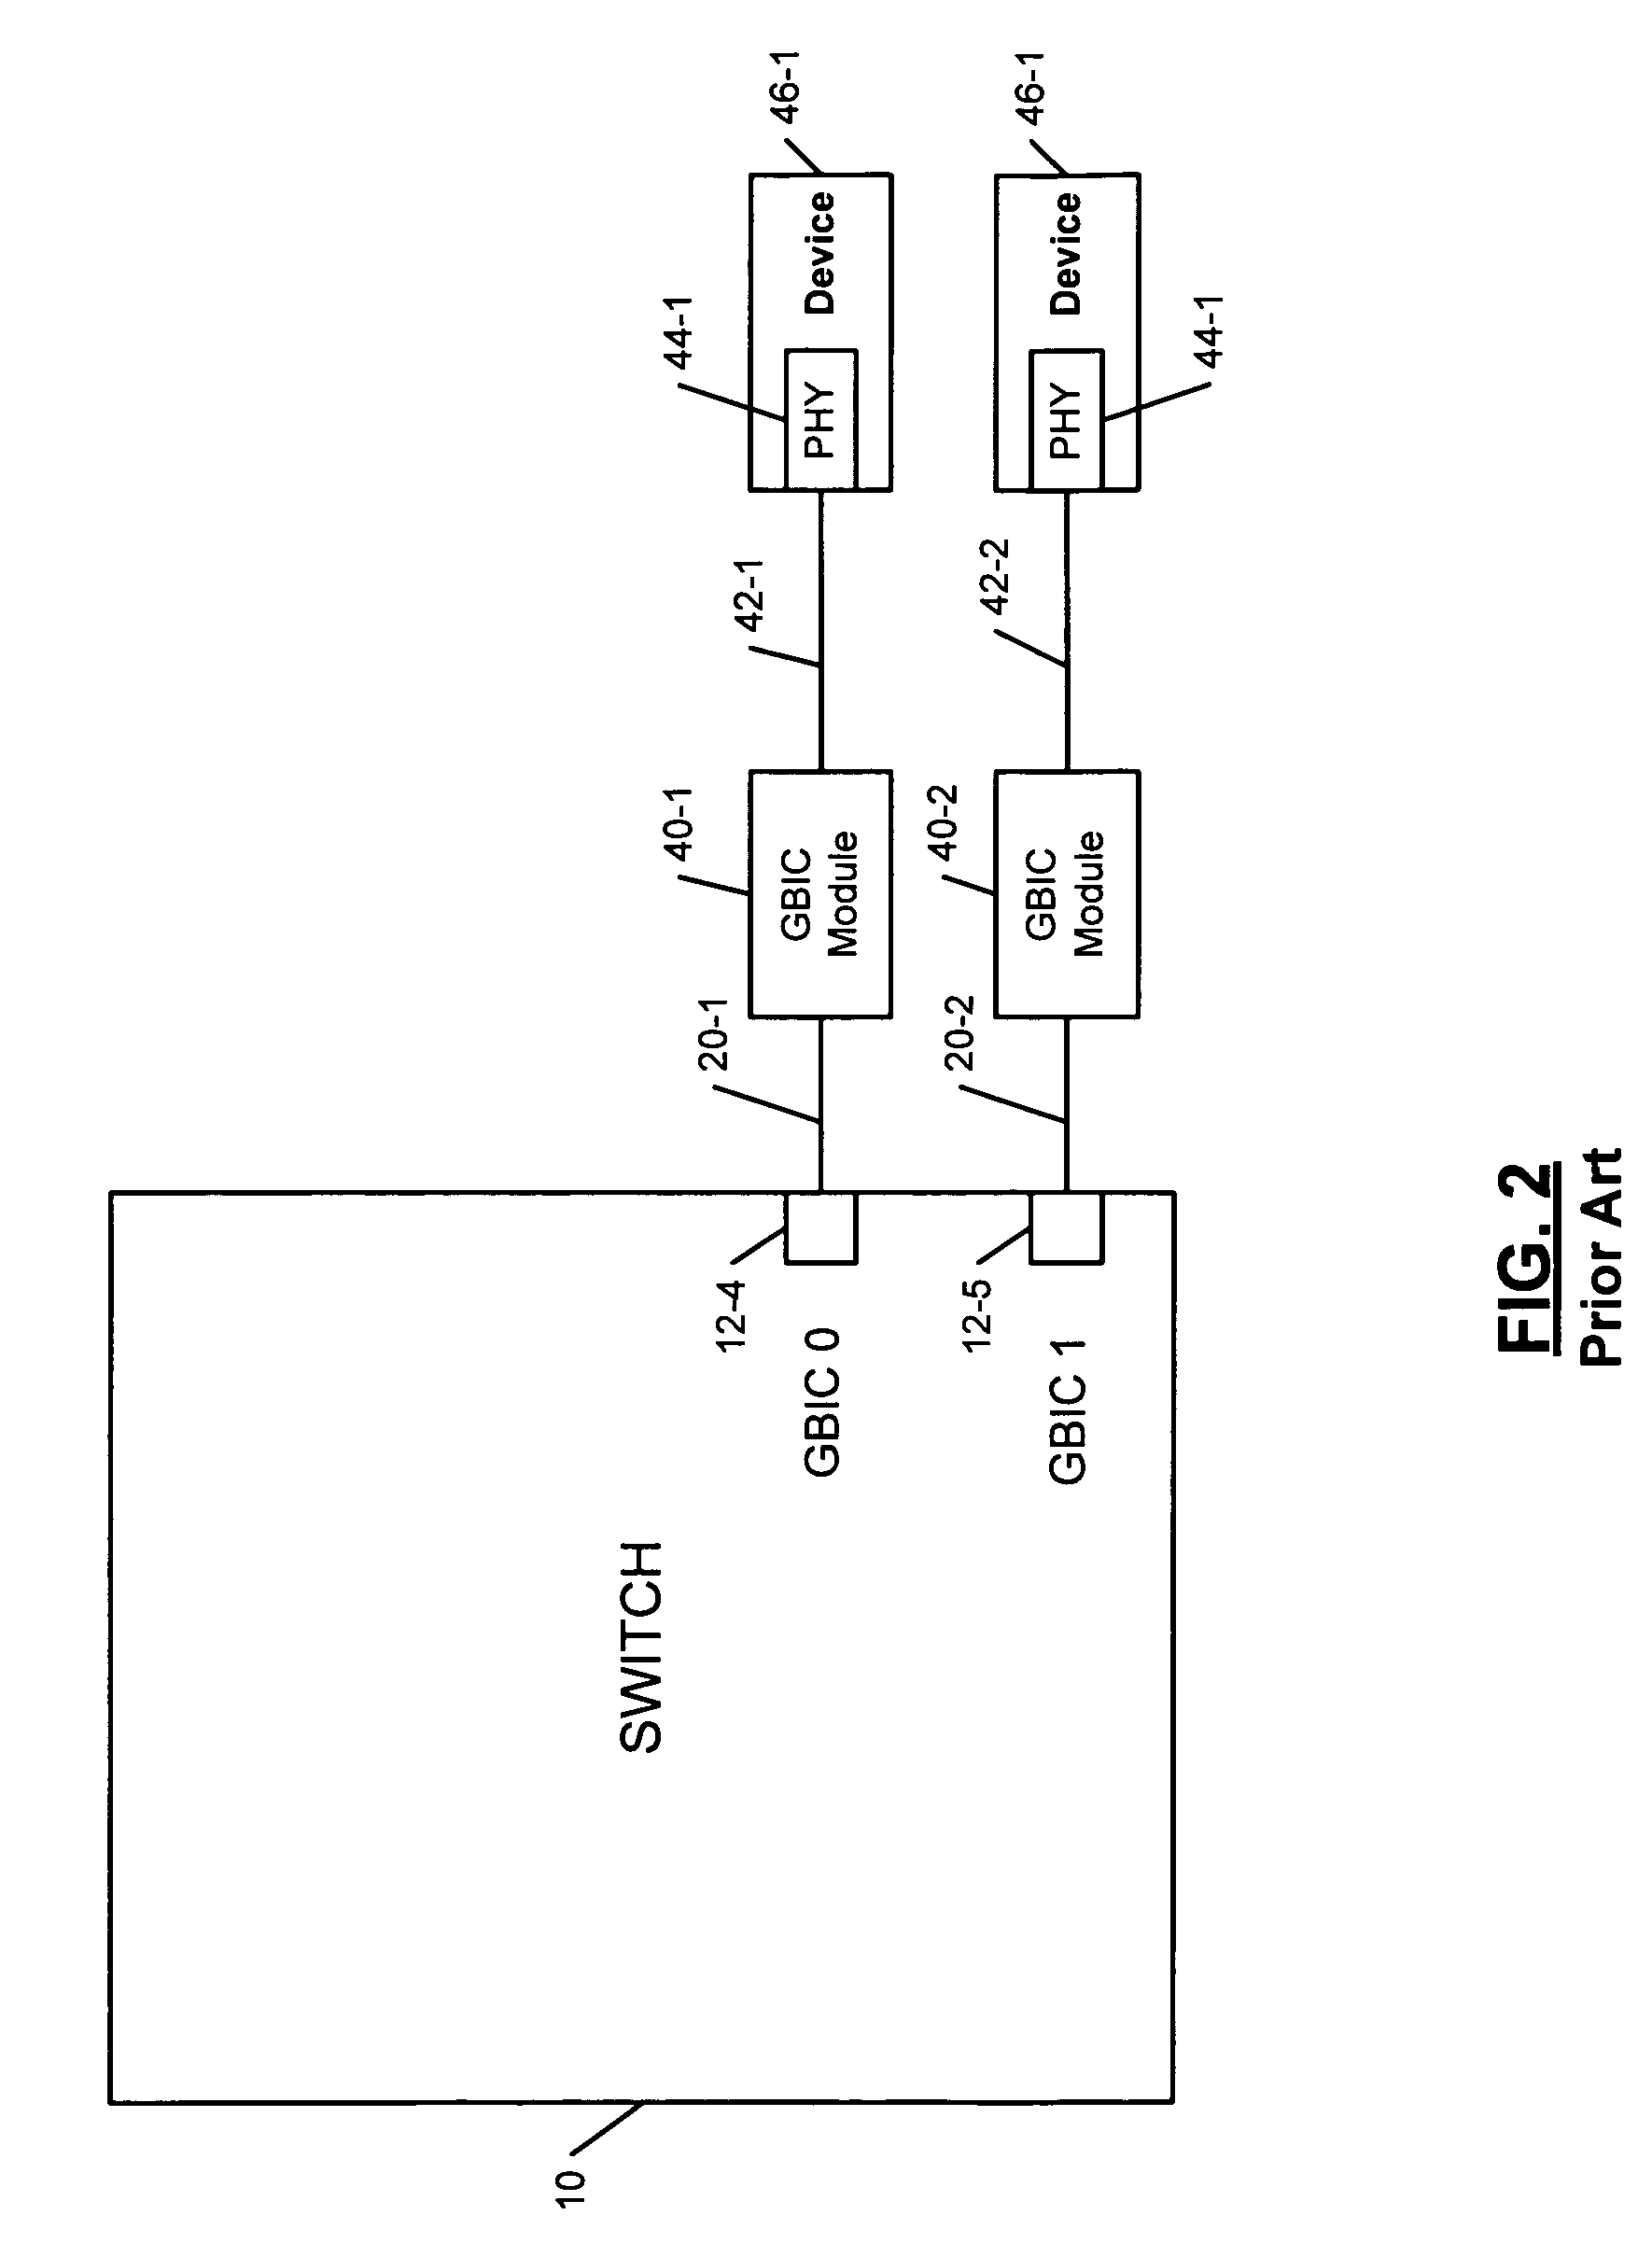 Autonegotiation between 1000Base-X and 1000Base-T